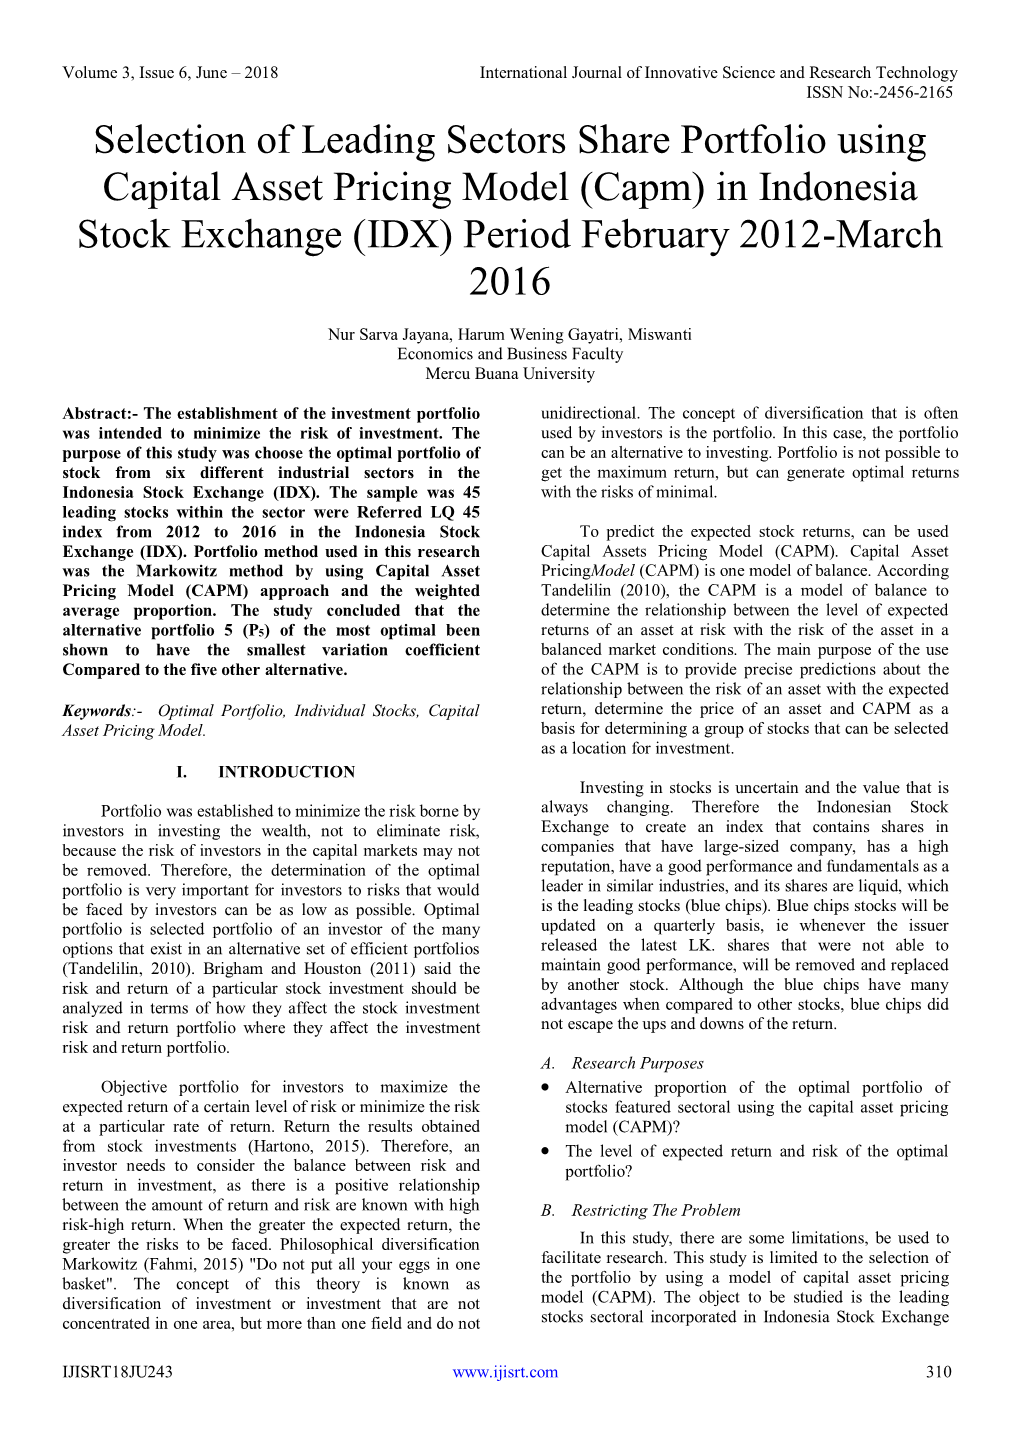 In Indonesia Stock Exchange (IDX) Period February 2012-March 2016